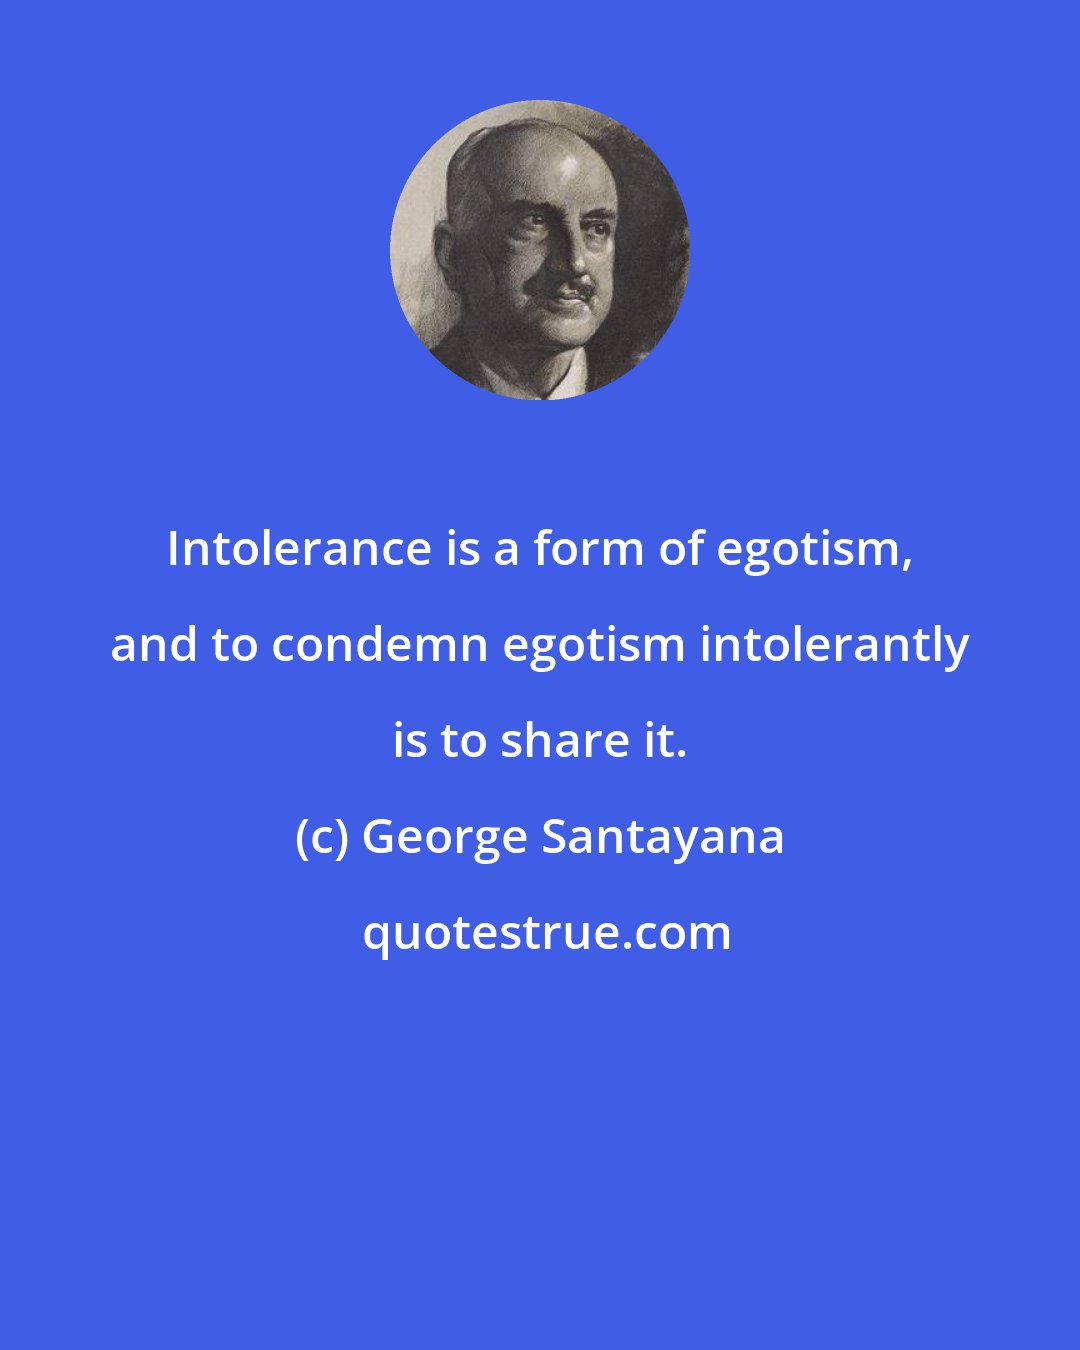 George Santayana: Intolerance is a form of egotism, and to condemn egotism intolerantly is to share it.